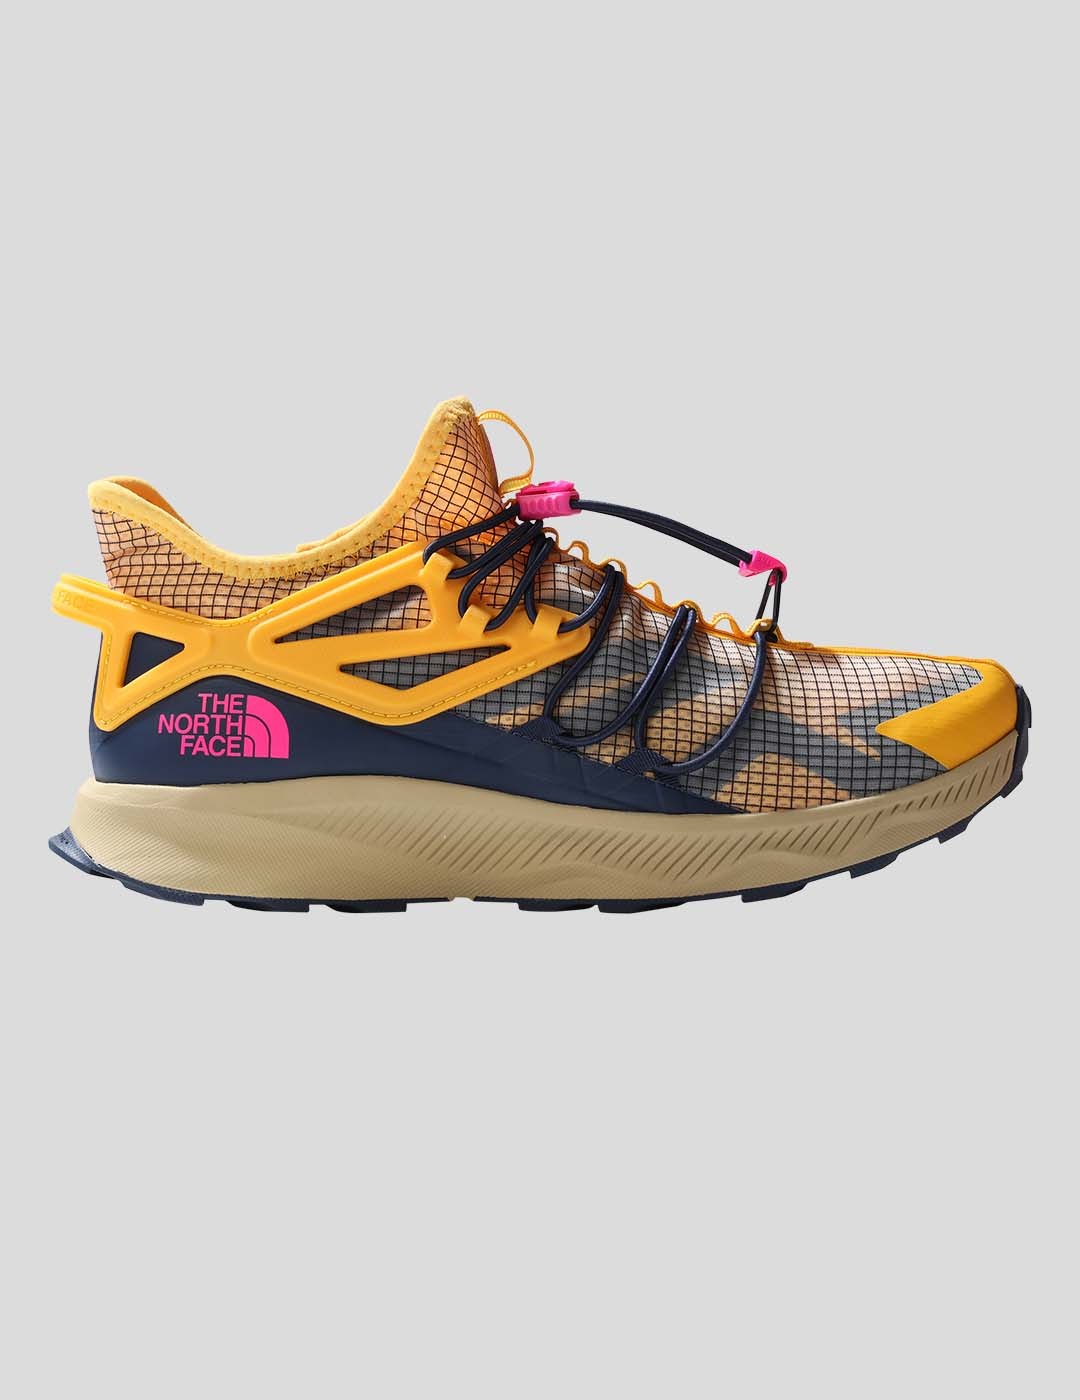 ZAPATILLAS THE NORTH FACE OXEYE TECH SUMMIT GOLD/SUMMIT NAVY